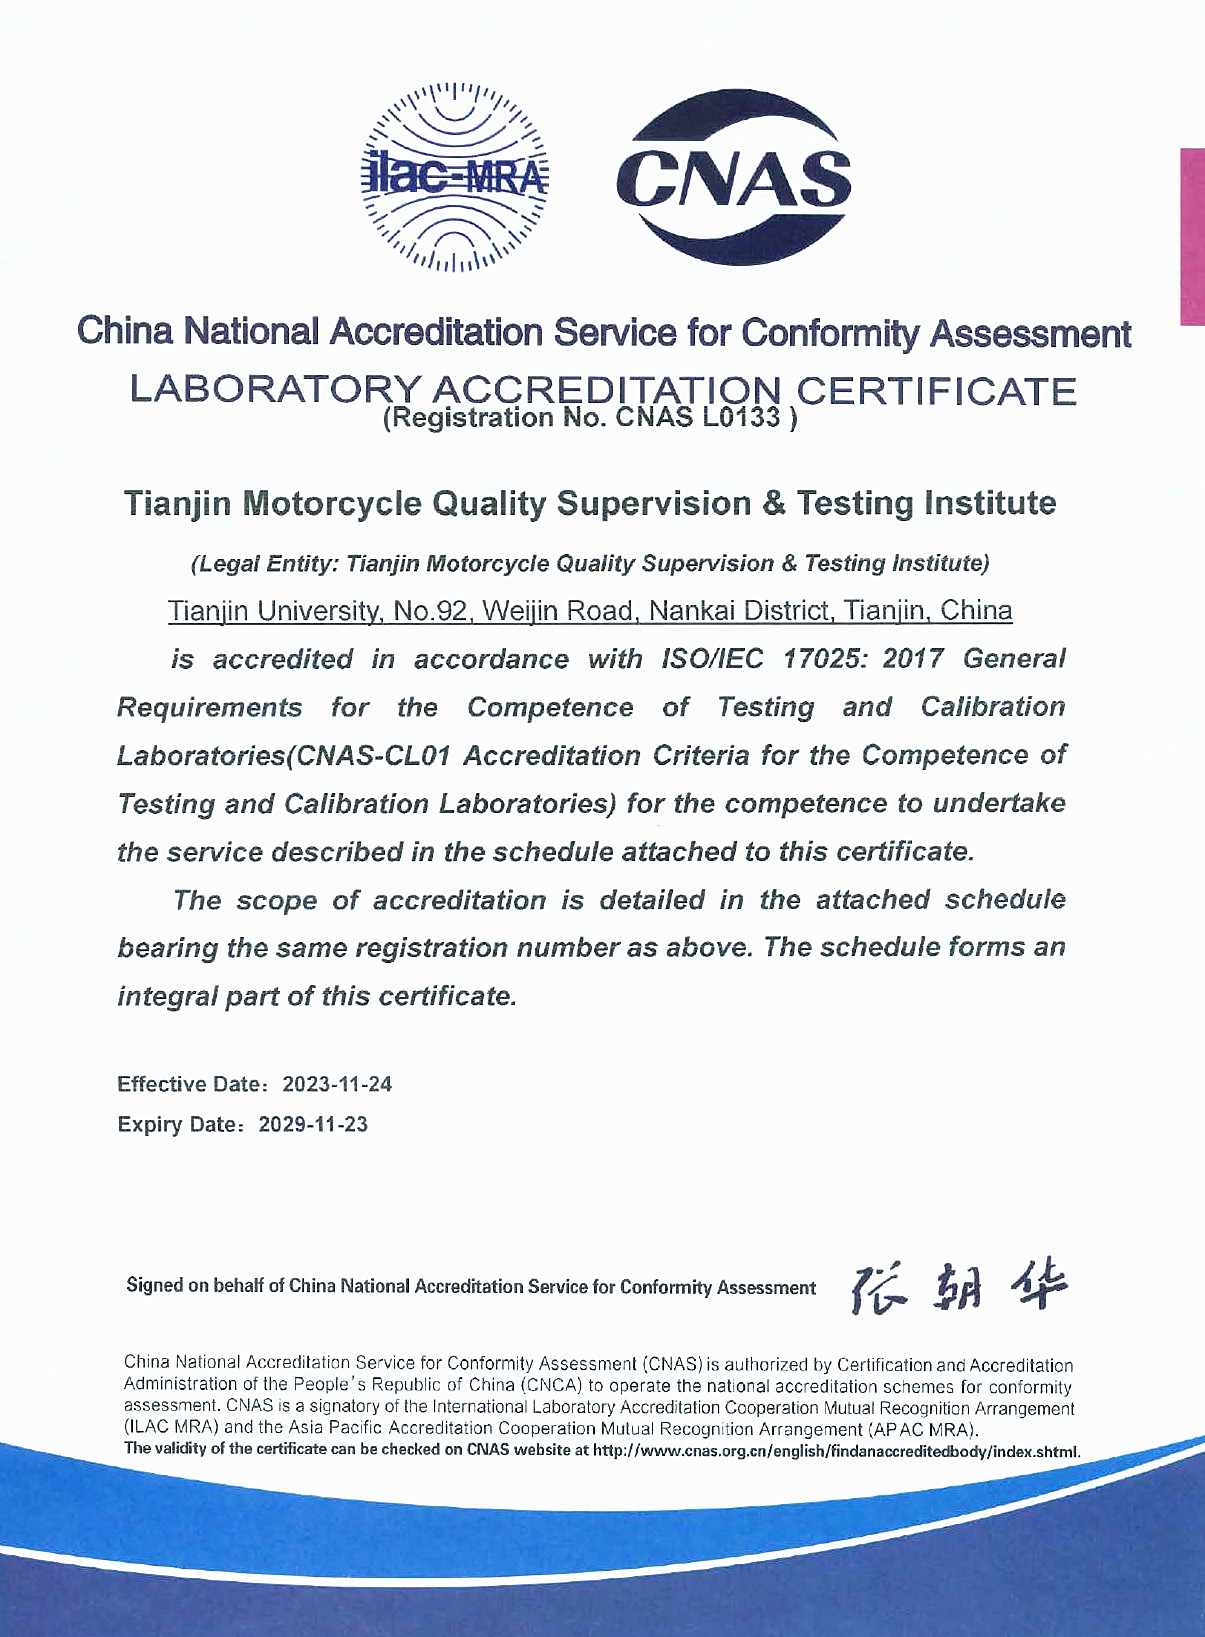 Accreditation certificate of Tianjin Motorcycle Quality Supervision & Testing Institute(in English)